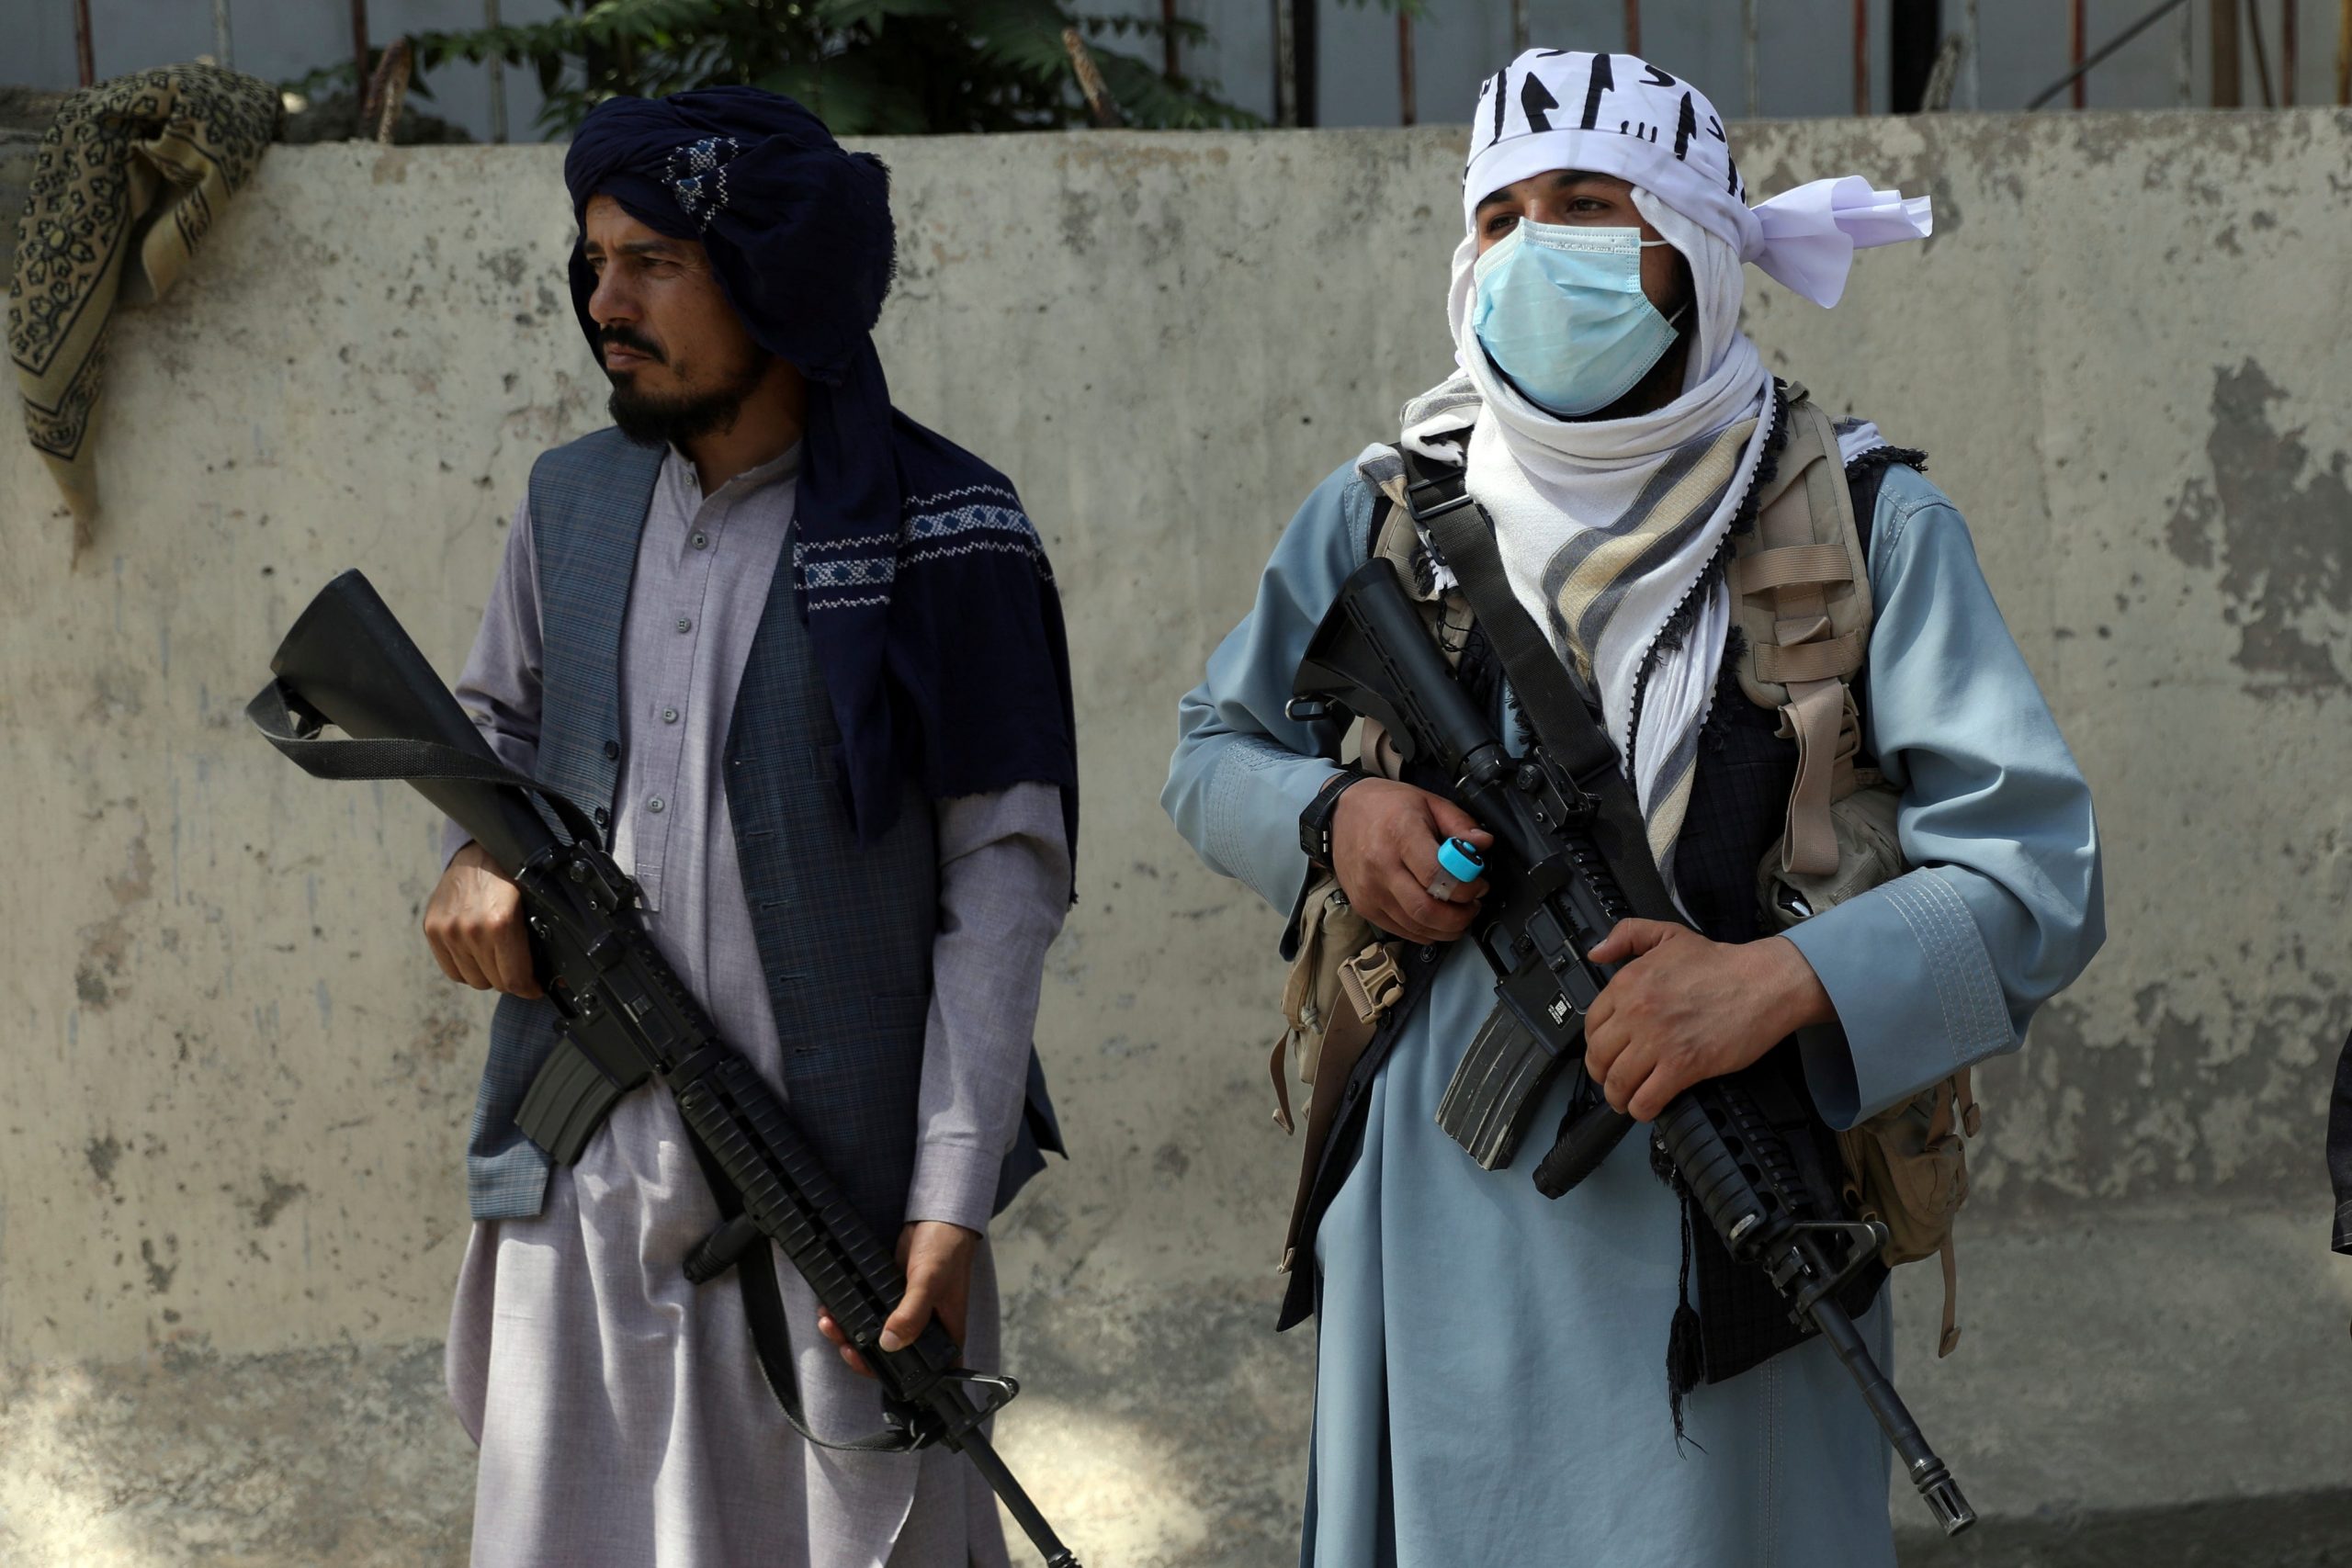 Taliban holding guns in Afghanistan